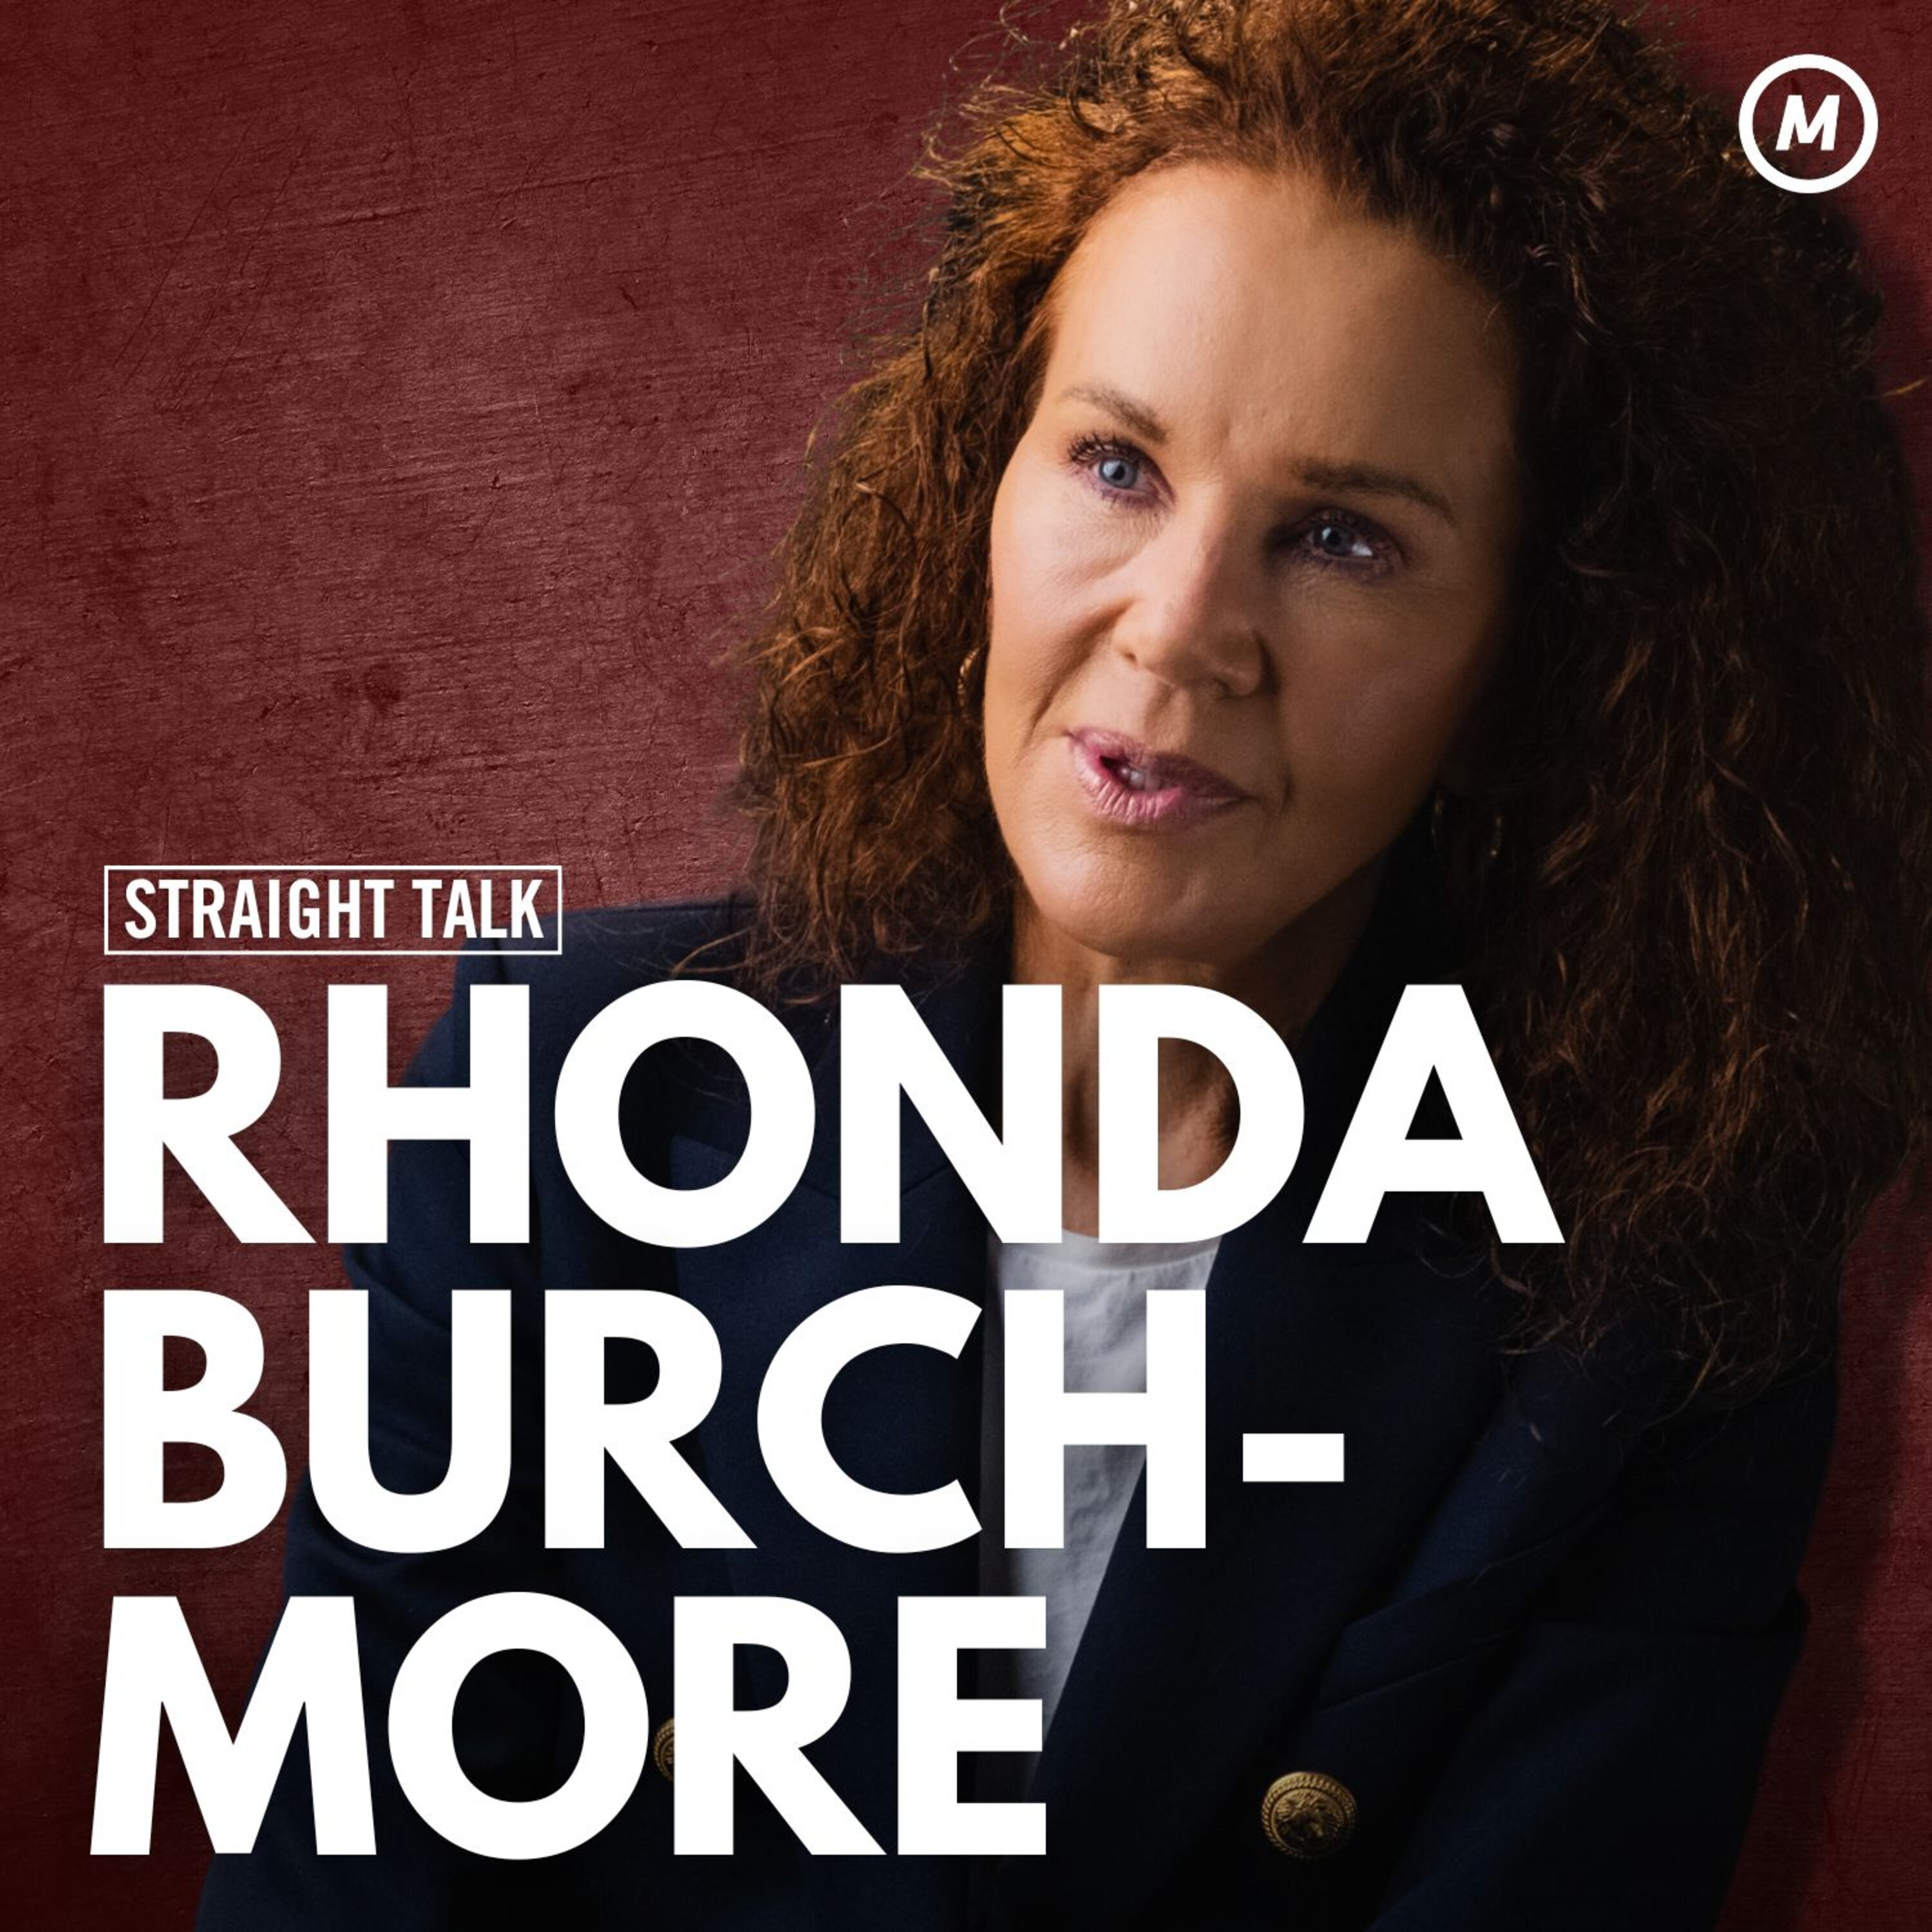 #74 Rhonda Burchmore: Entertainment royalty shares the raw highs and lows of the entertainment industry